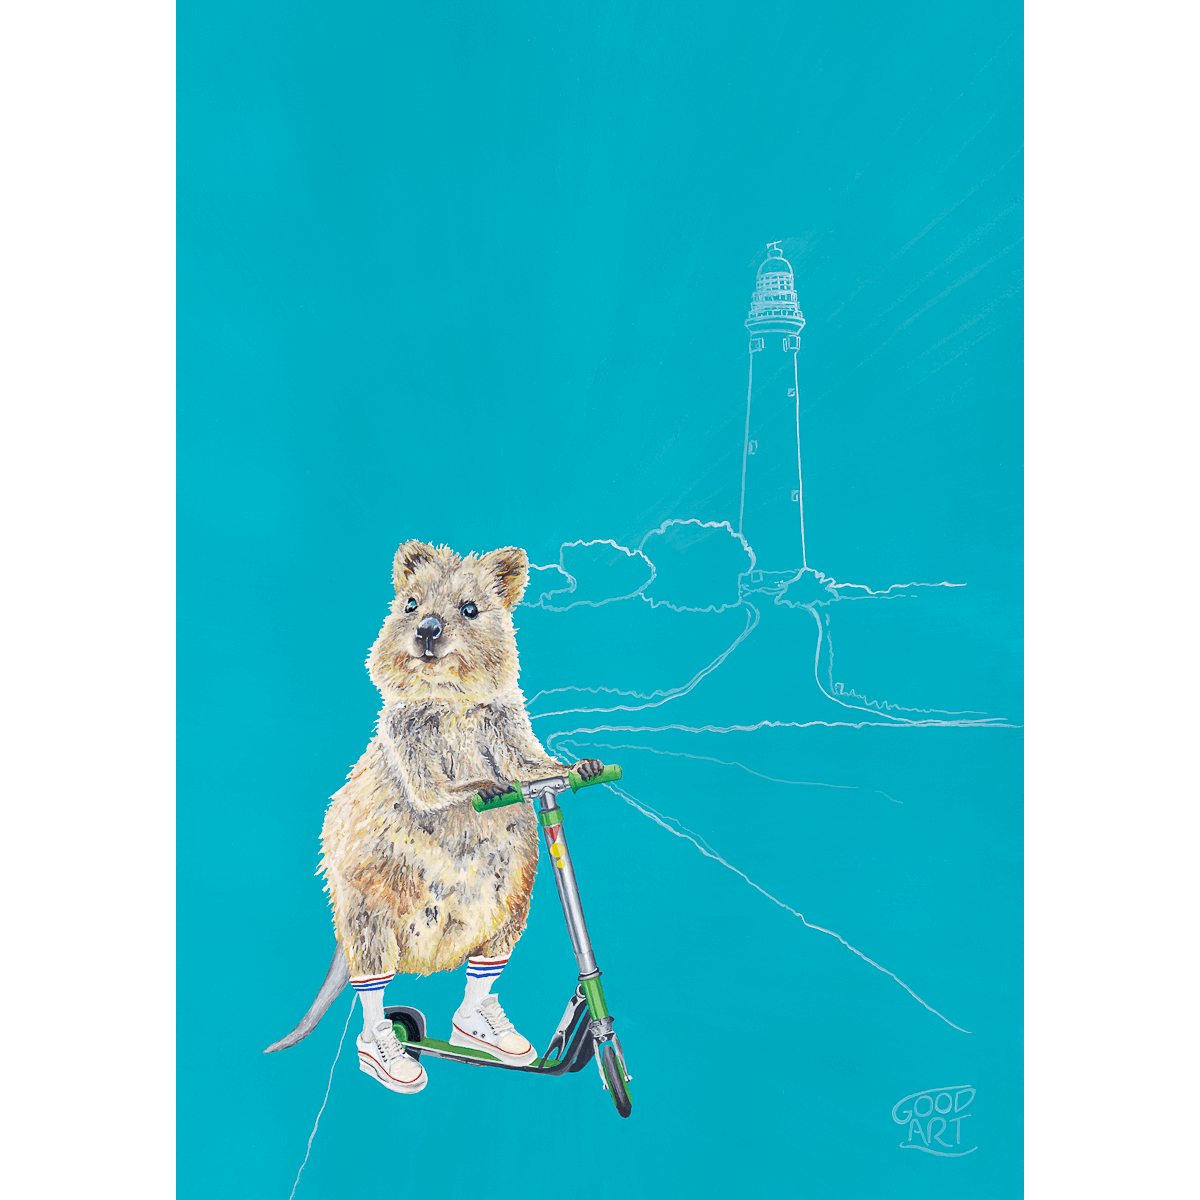 A painting of a Western Australian Rottnest Quokka. The quokka is riding a scooter. An aqua background colour. Wall art for boys room by Good Art.